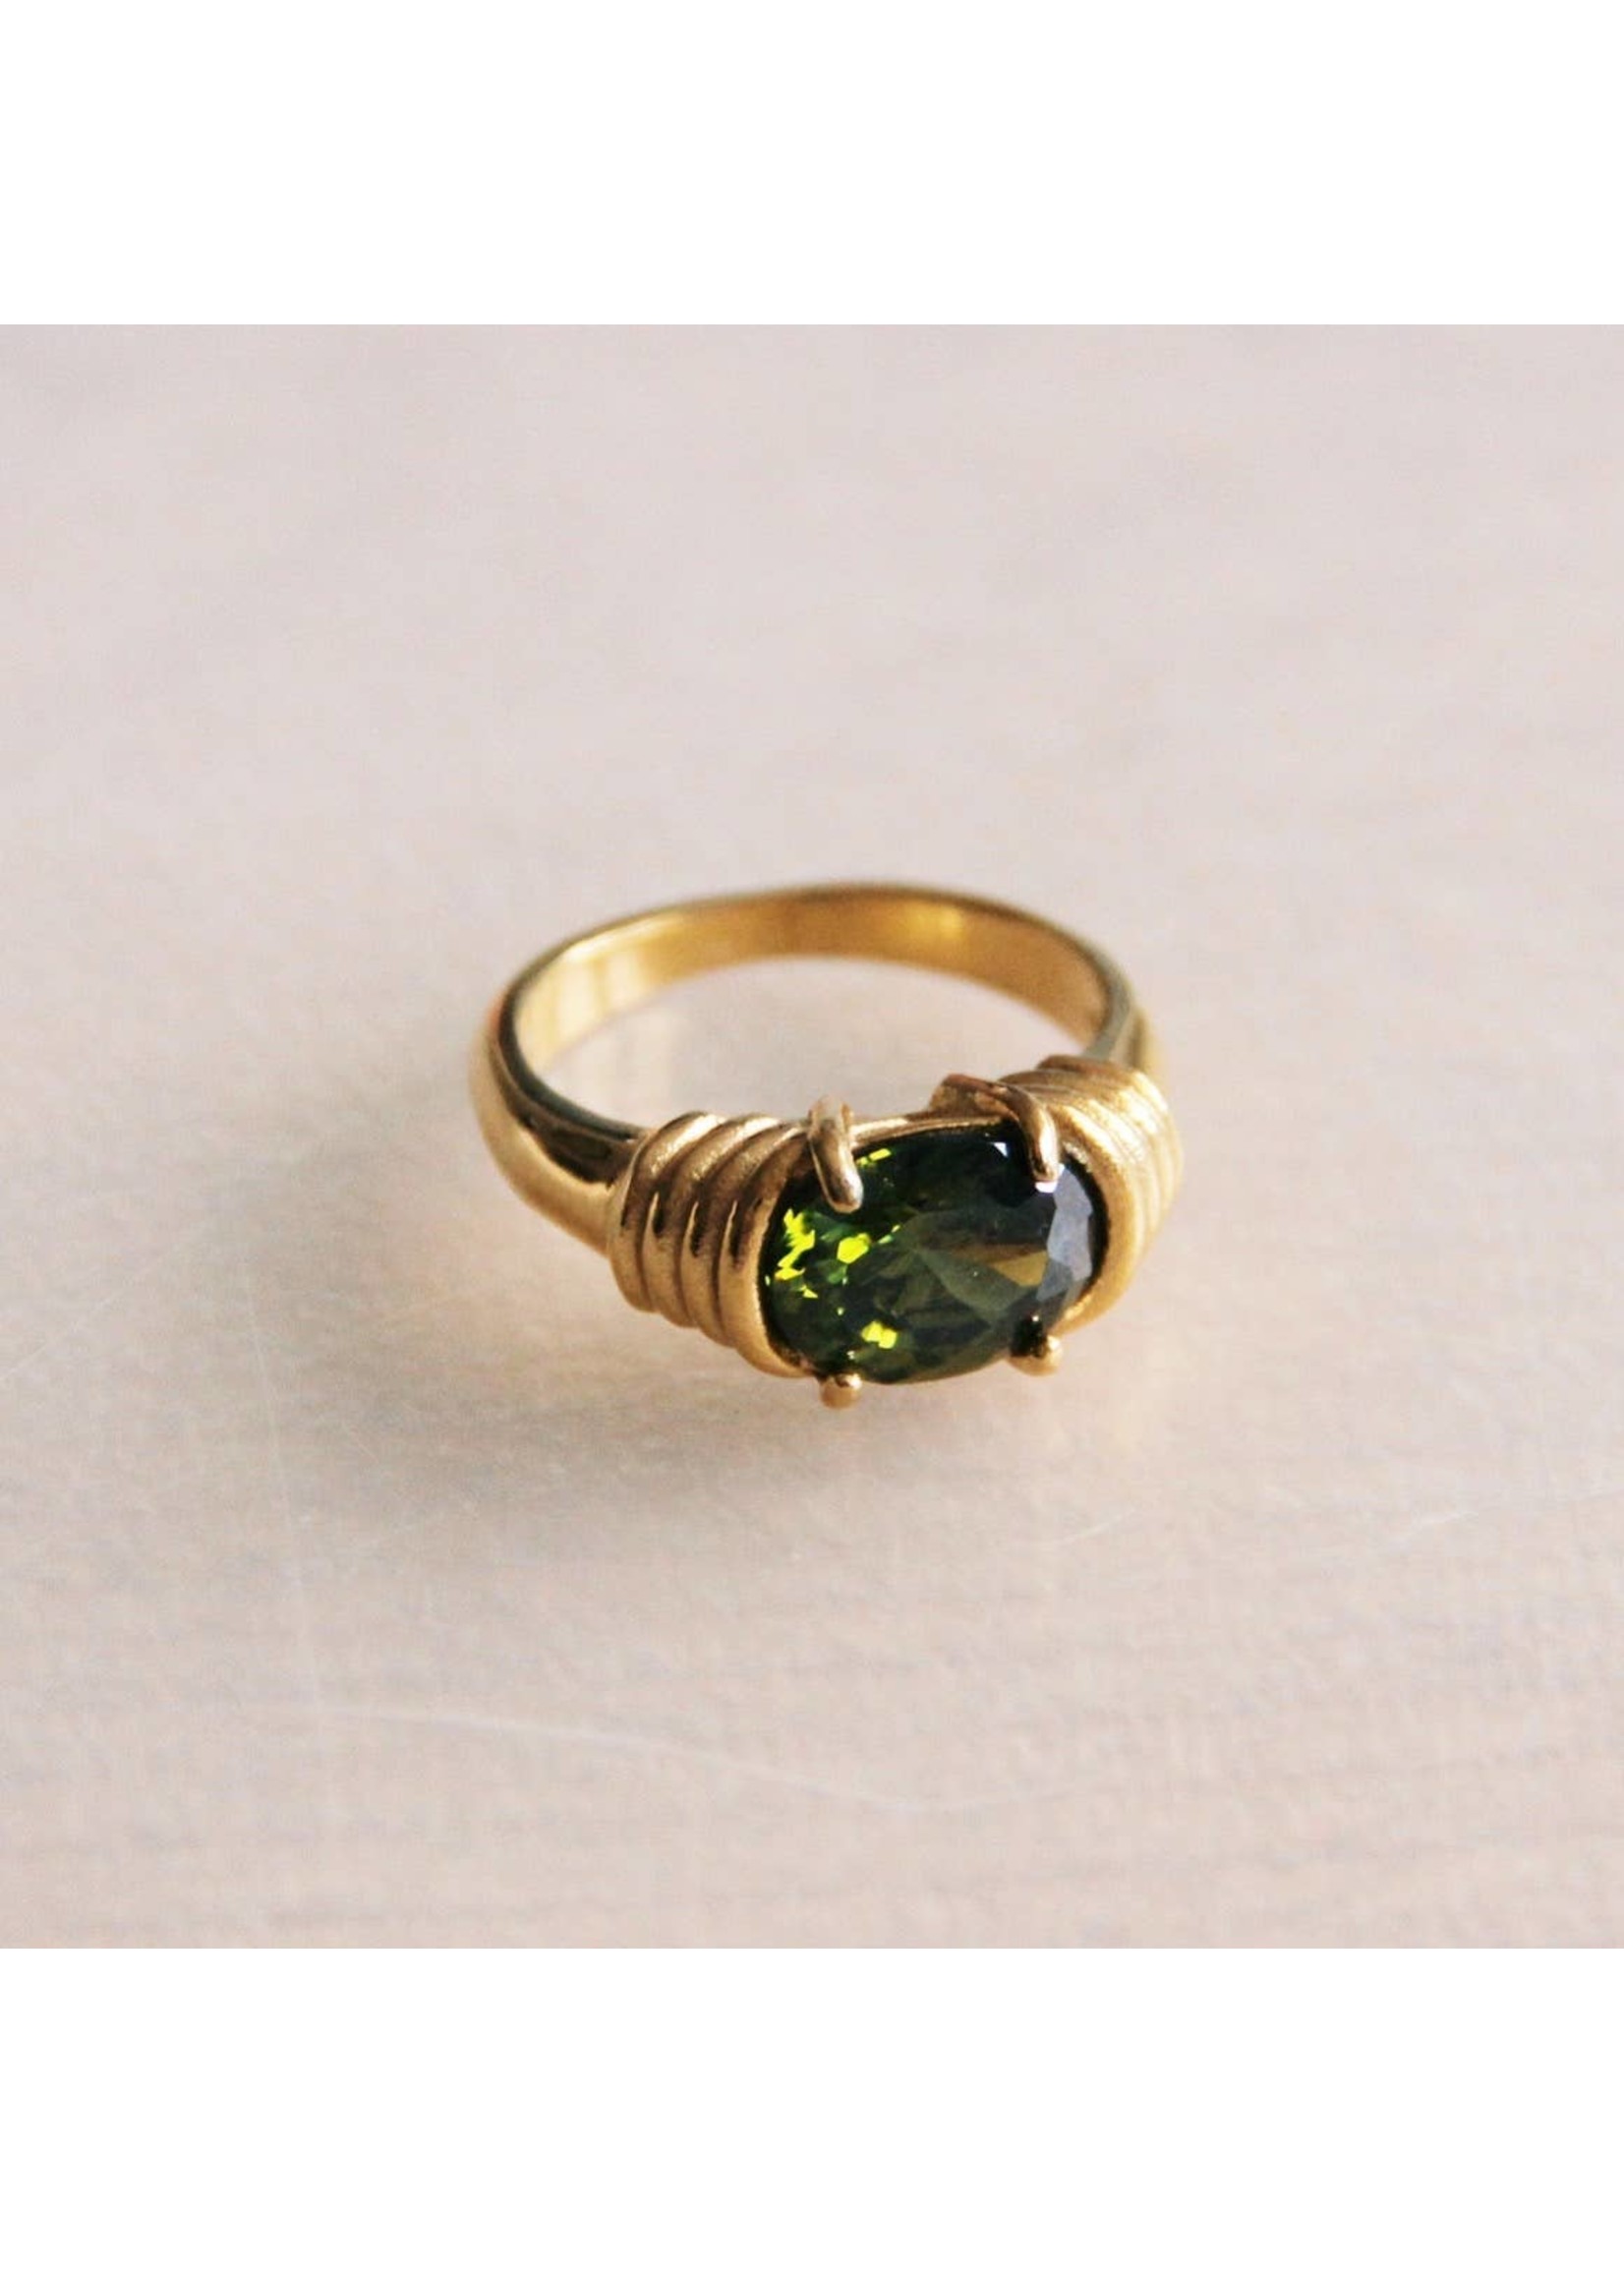 Steel ring with zirconia green stone